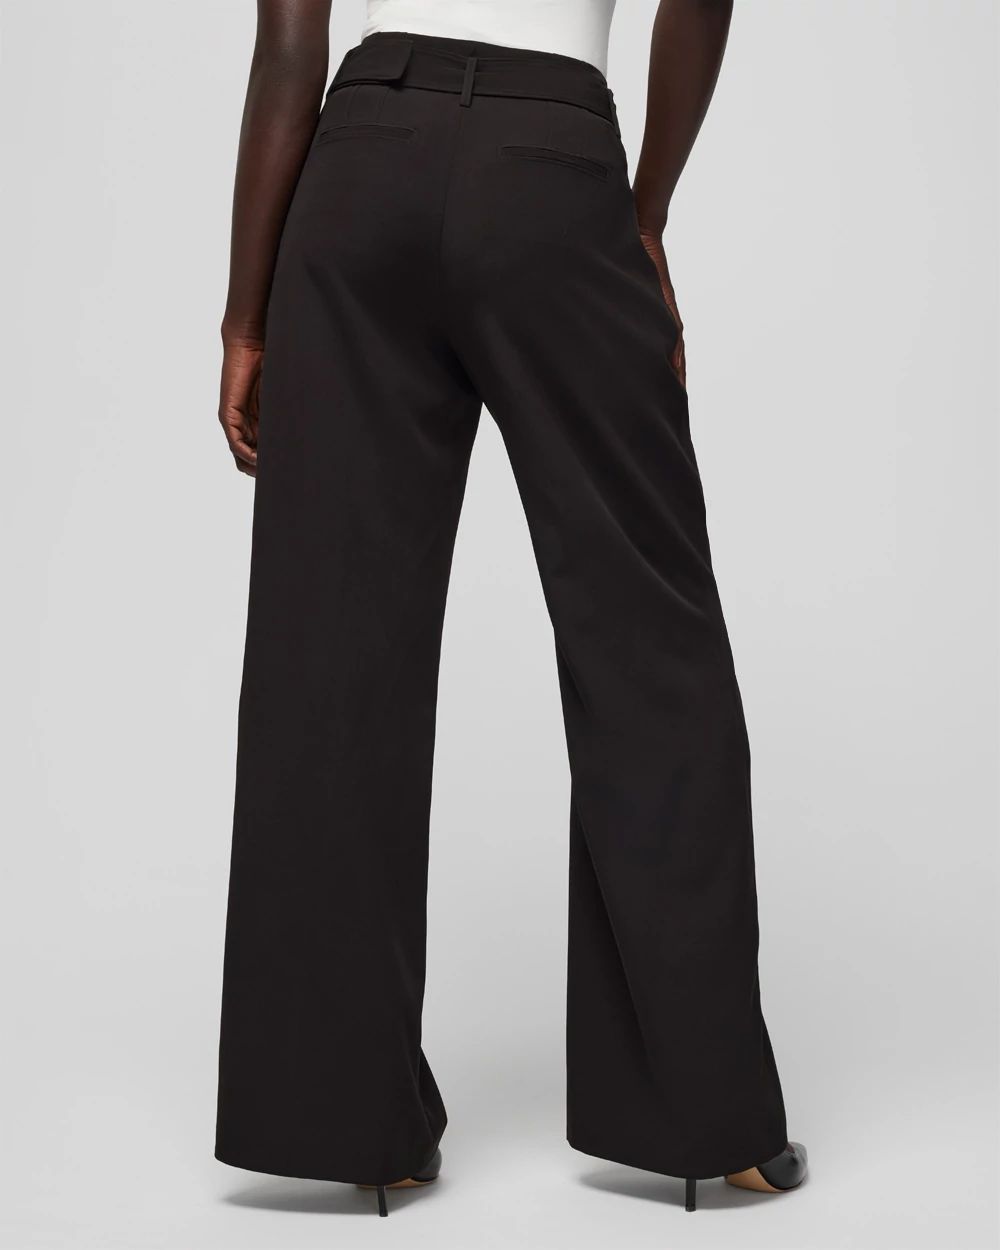 Curvy Fluid Wide Leg Pant click to view larger image.